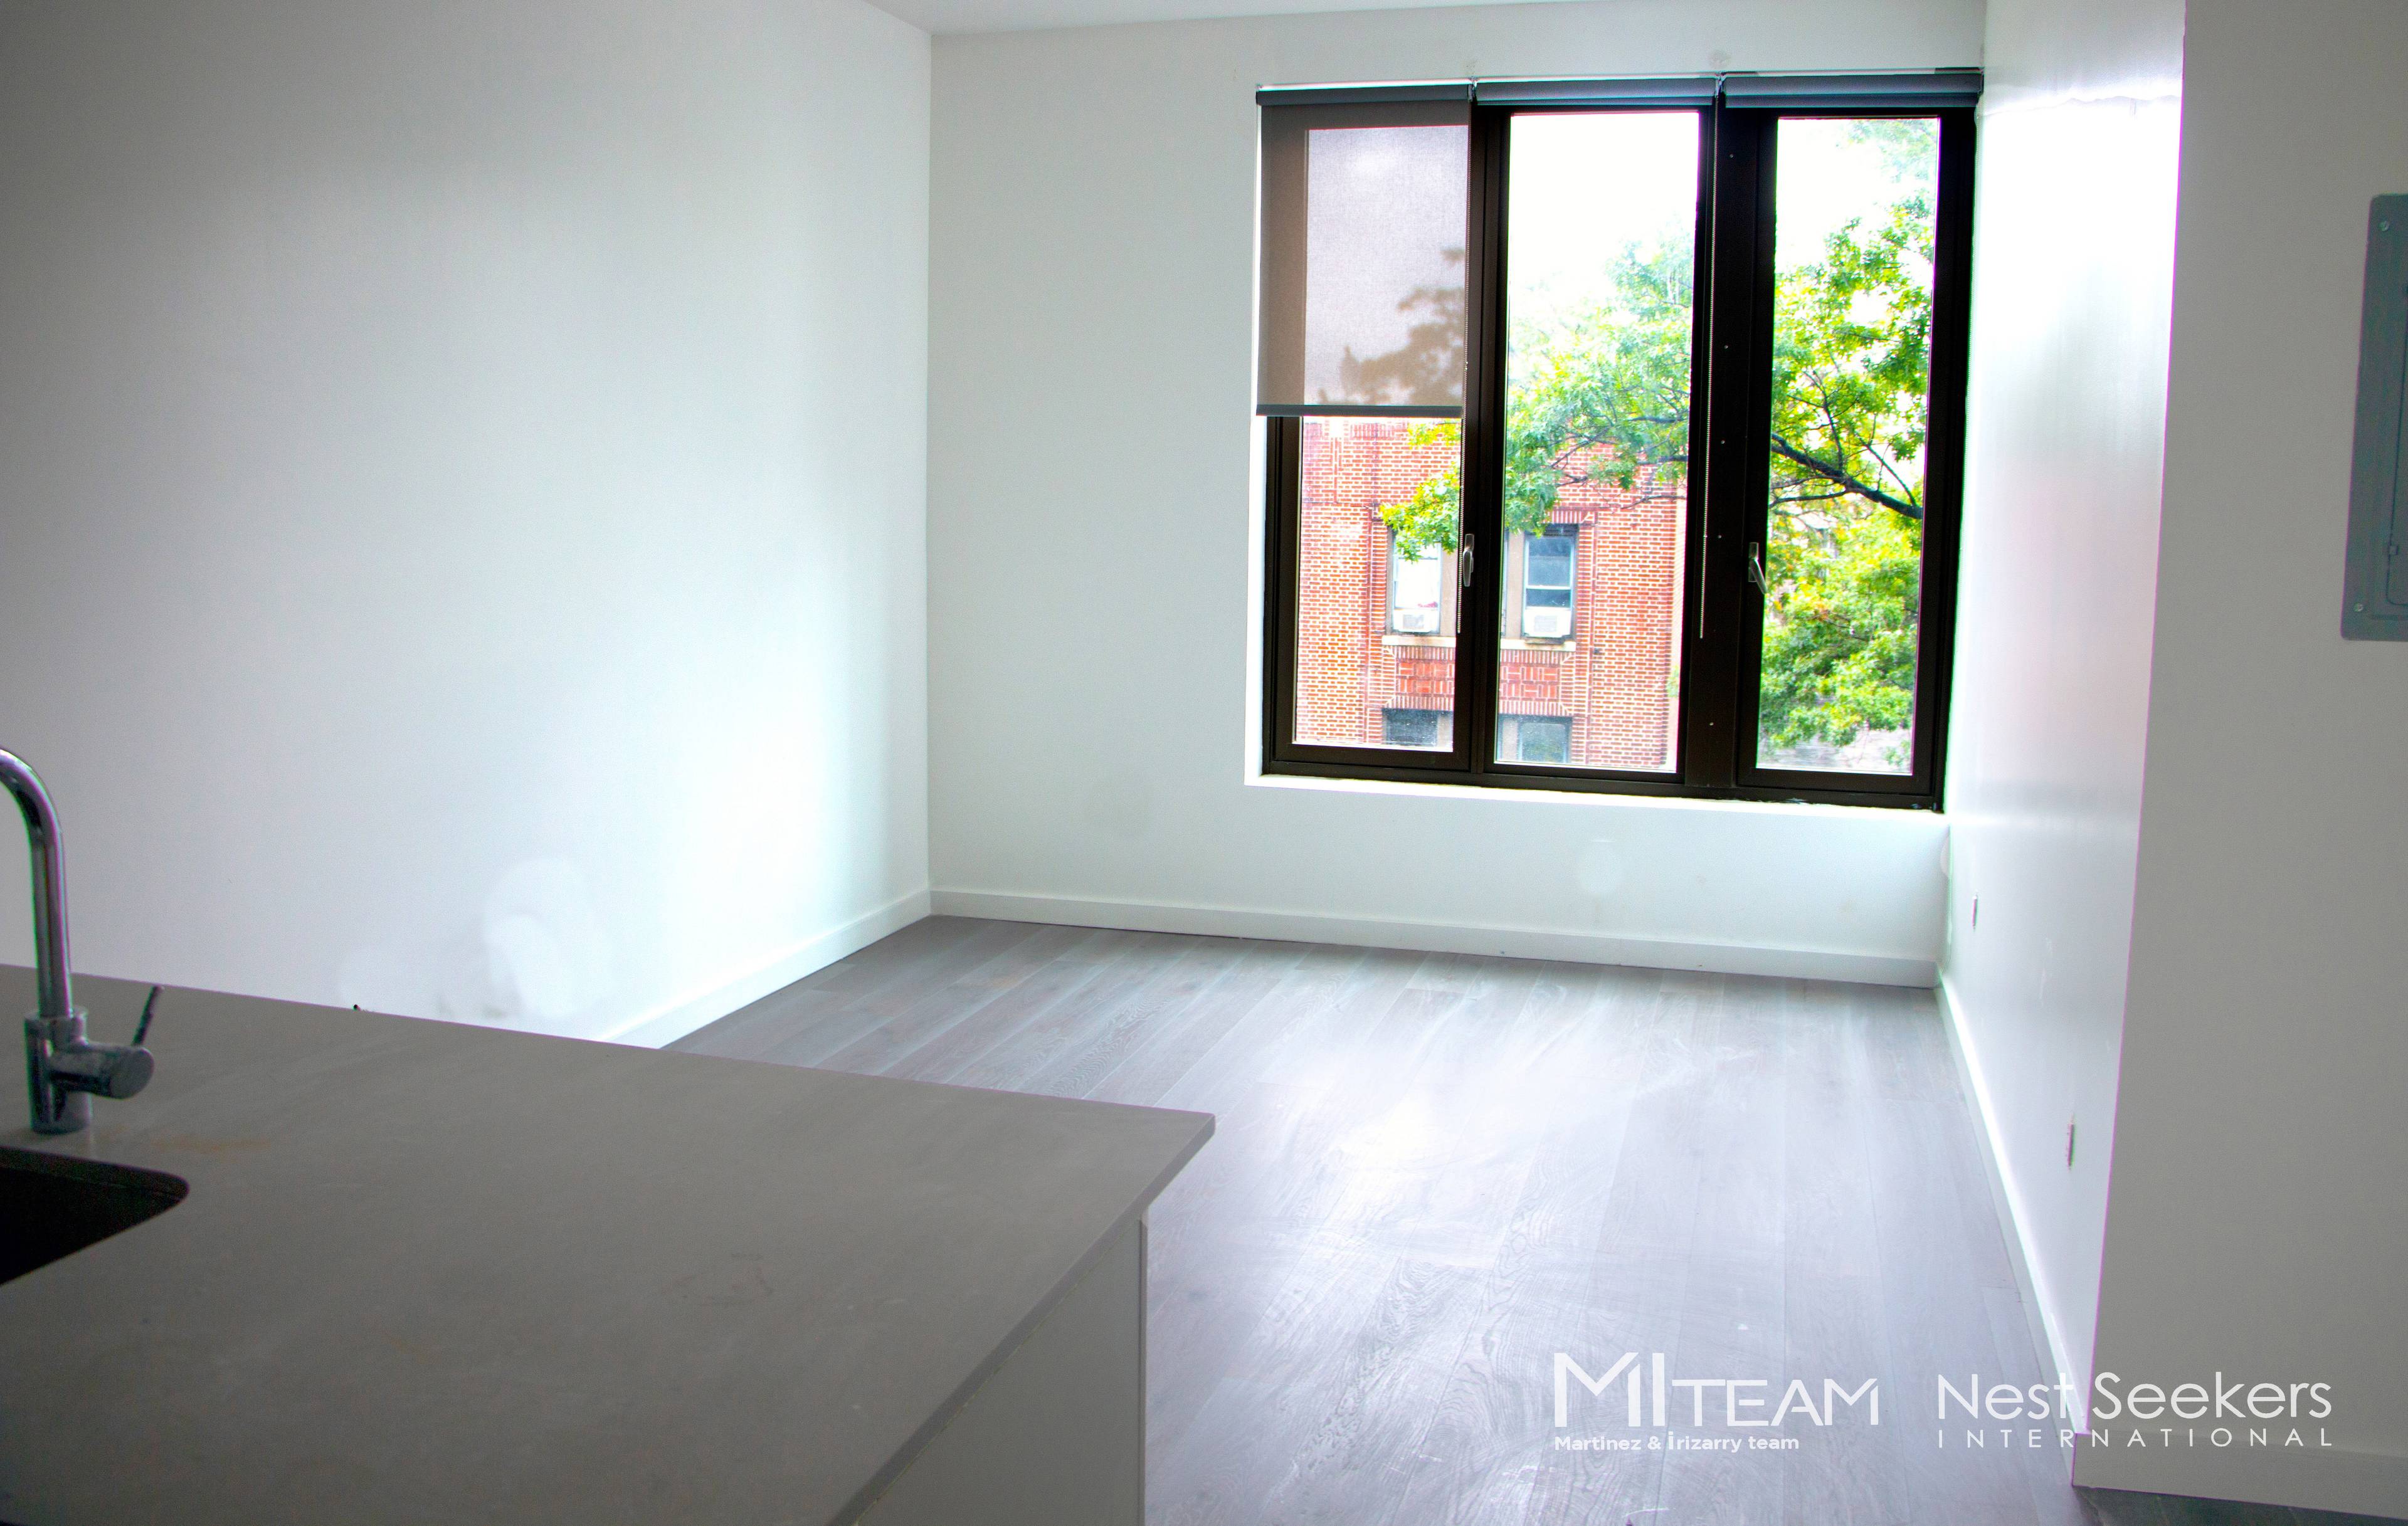 OPEN & SPACIOUS GUT RENOVATED 1 BED APARTMENT IN THE HEART OF ASTORIA